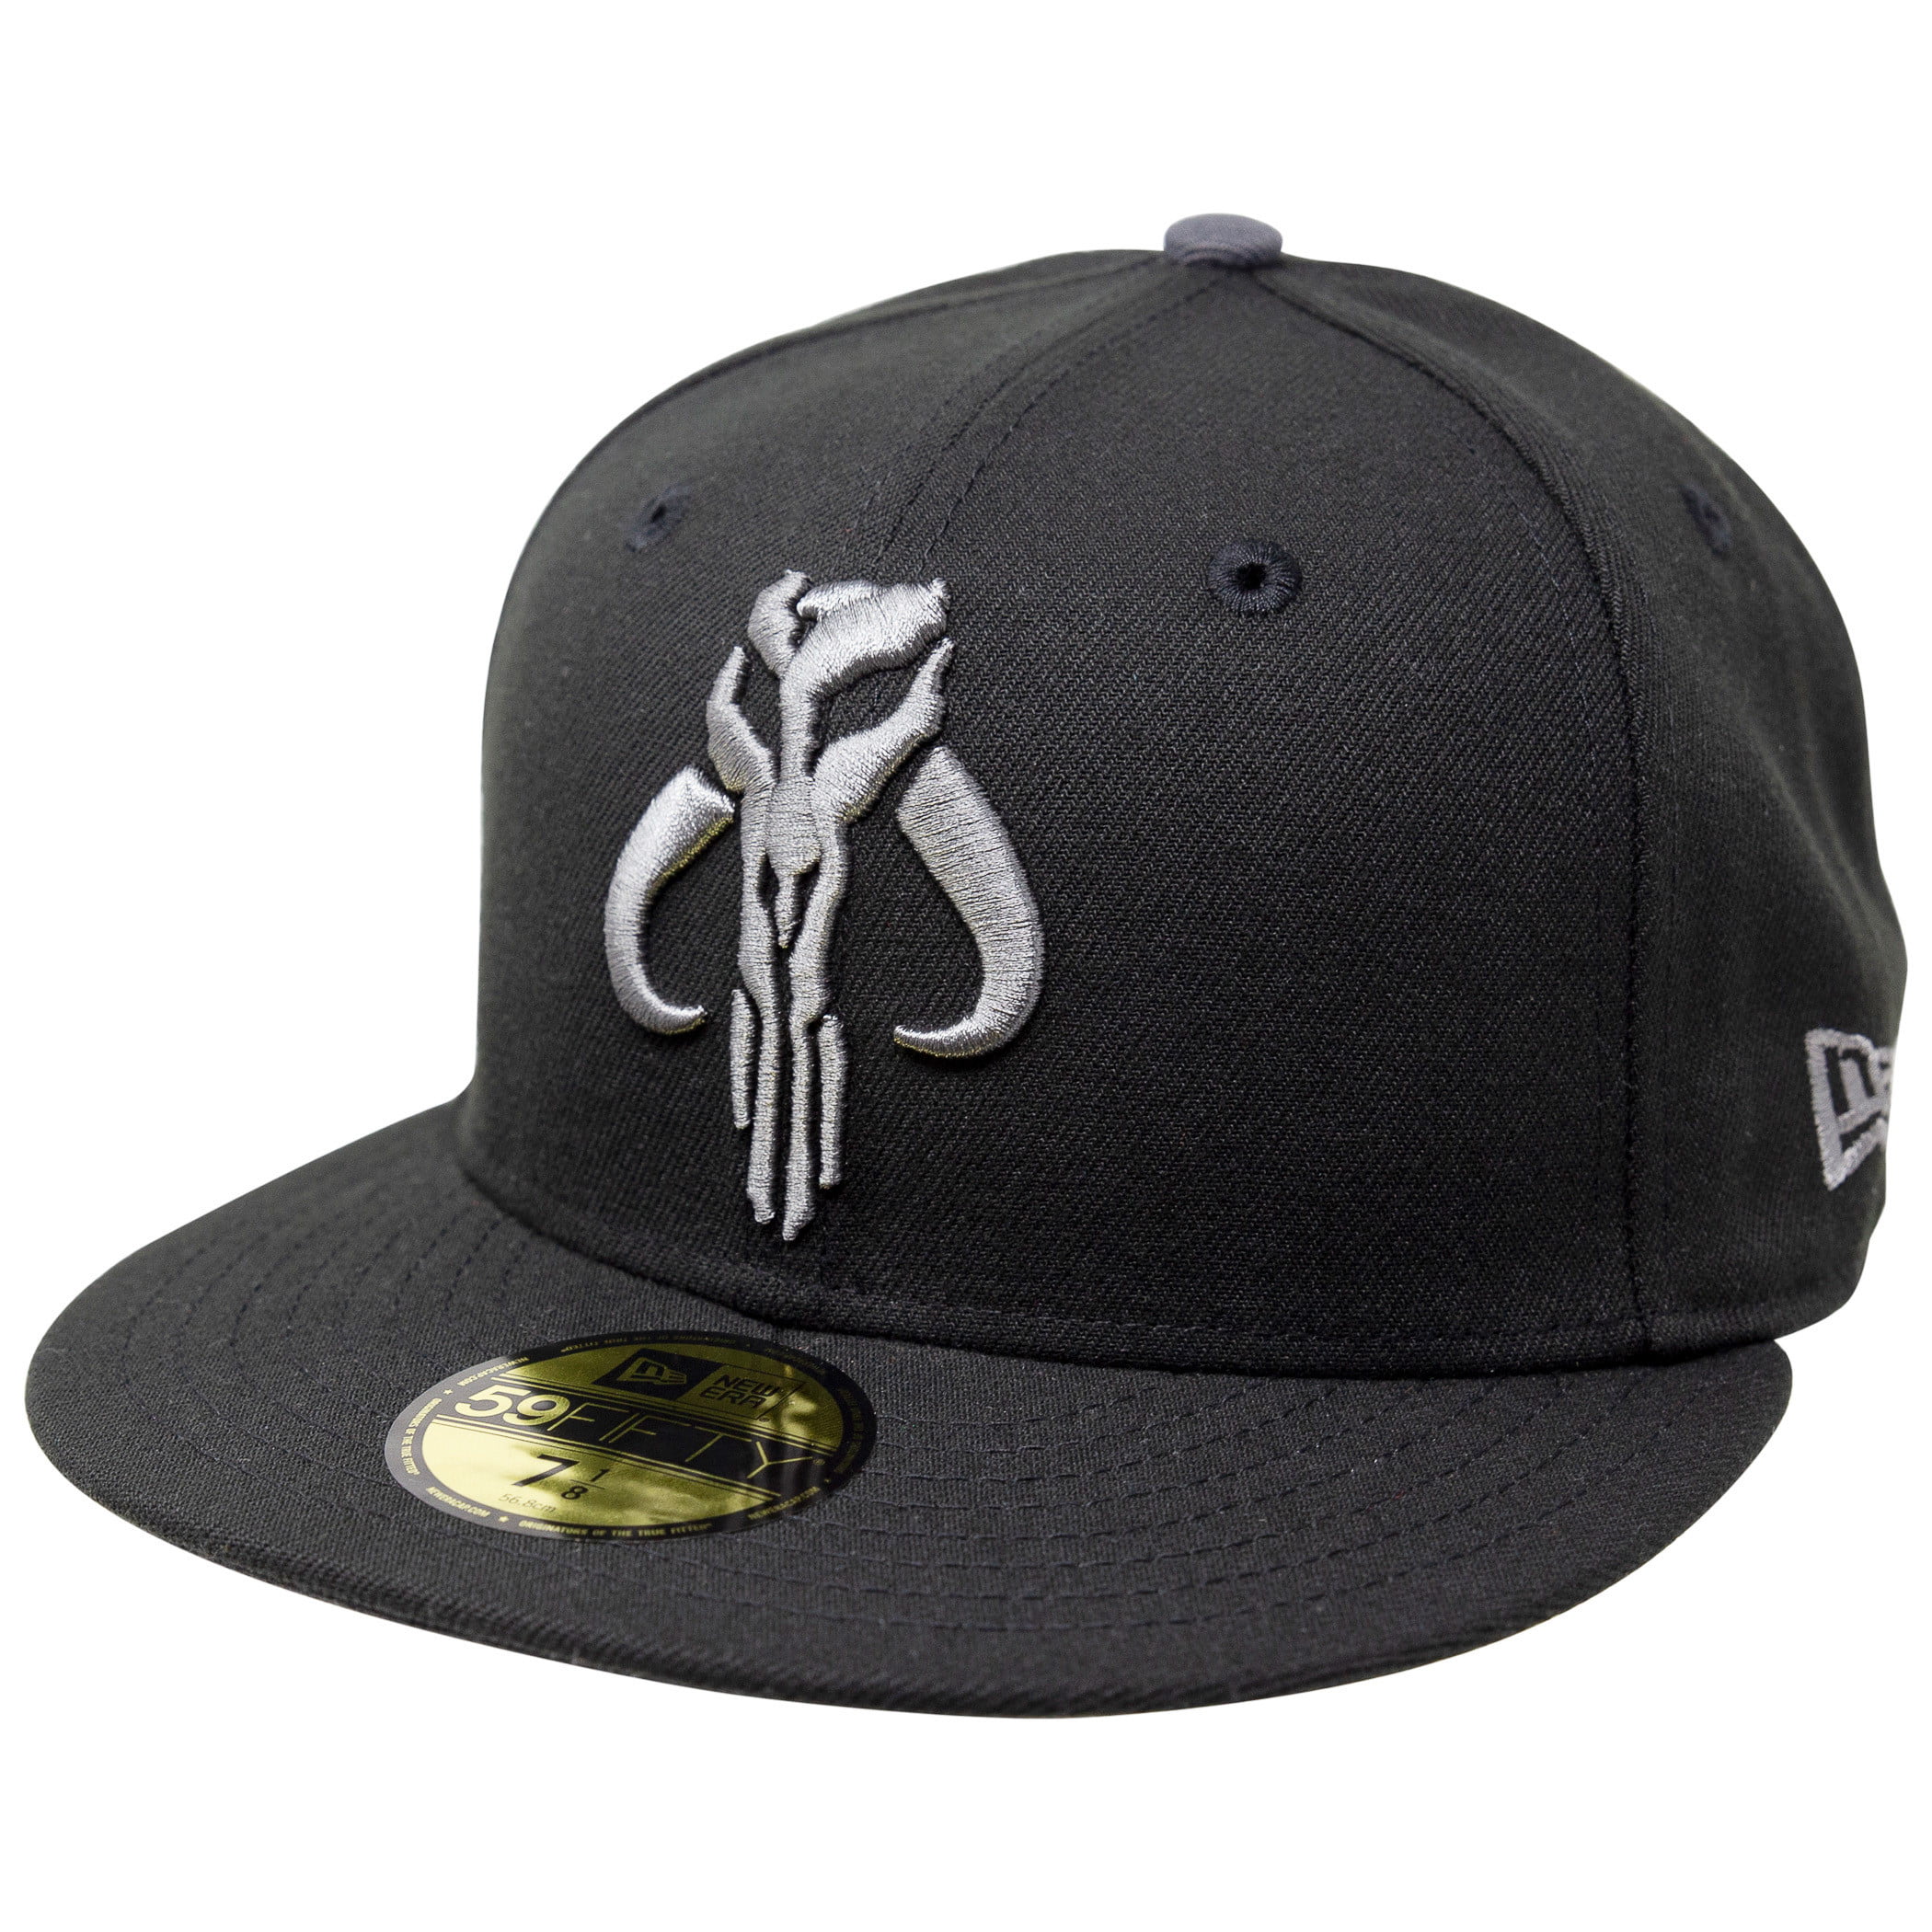 Star Wars The Mandalorian New Era 59fifty Fitted Hat 7 Fitted